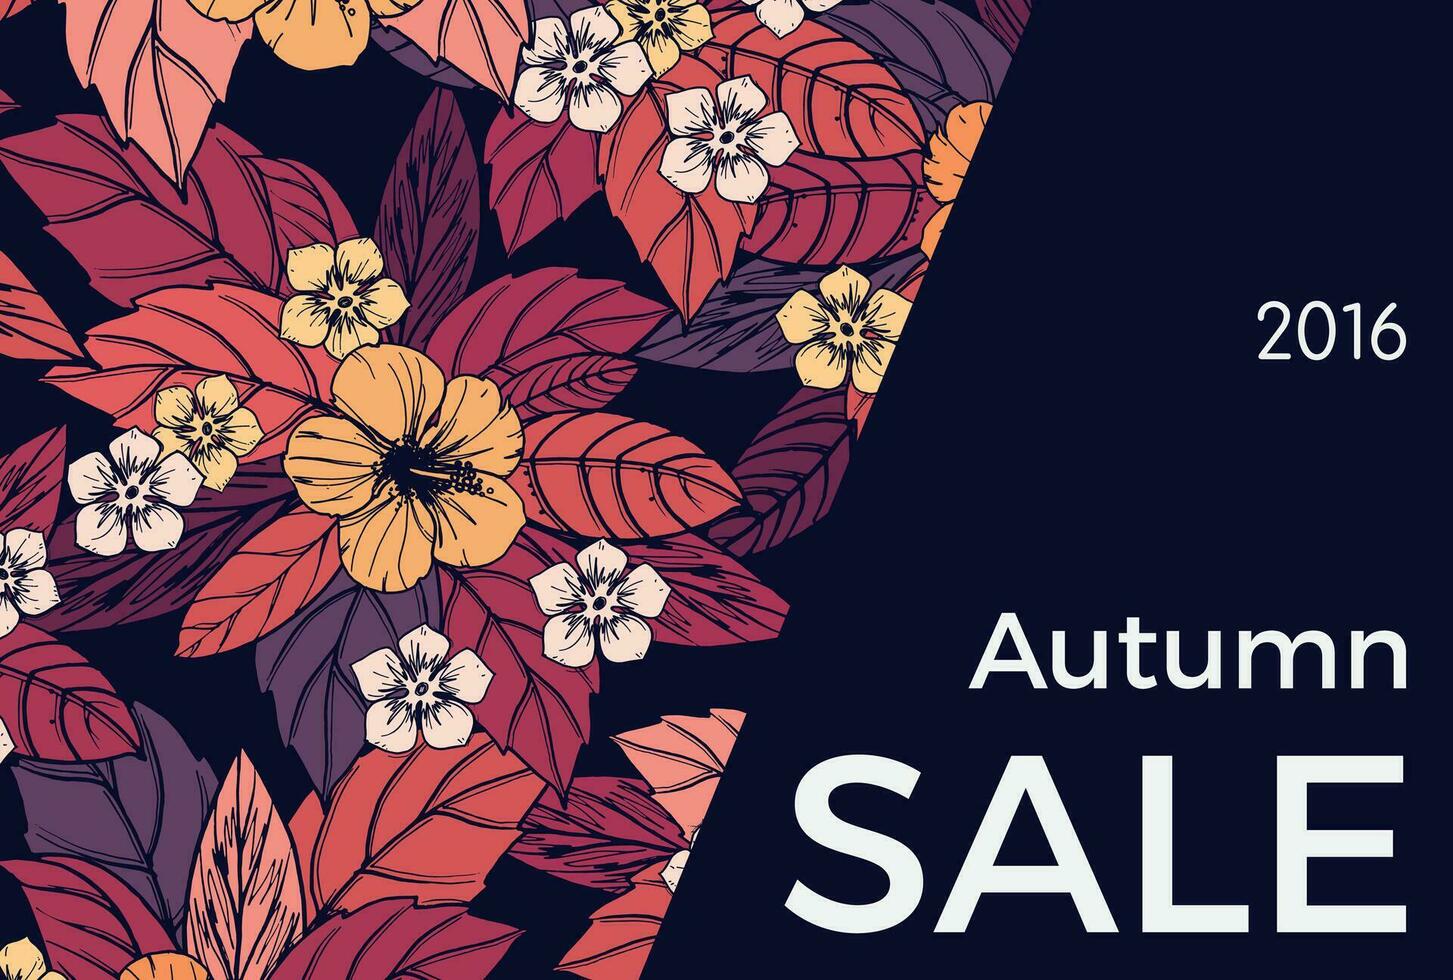 autumn floral card and banner design vector